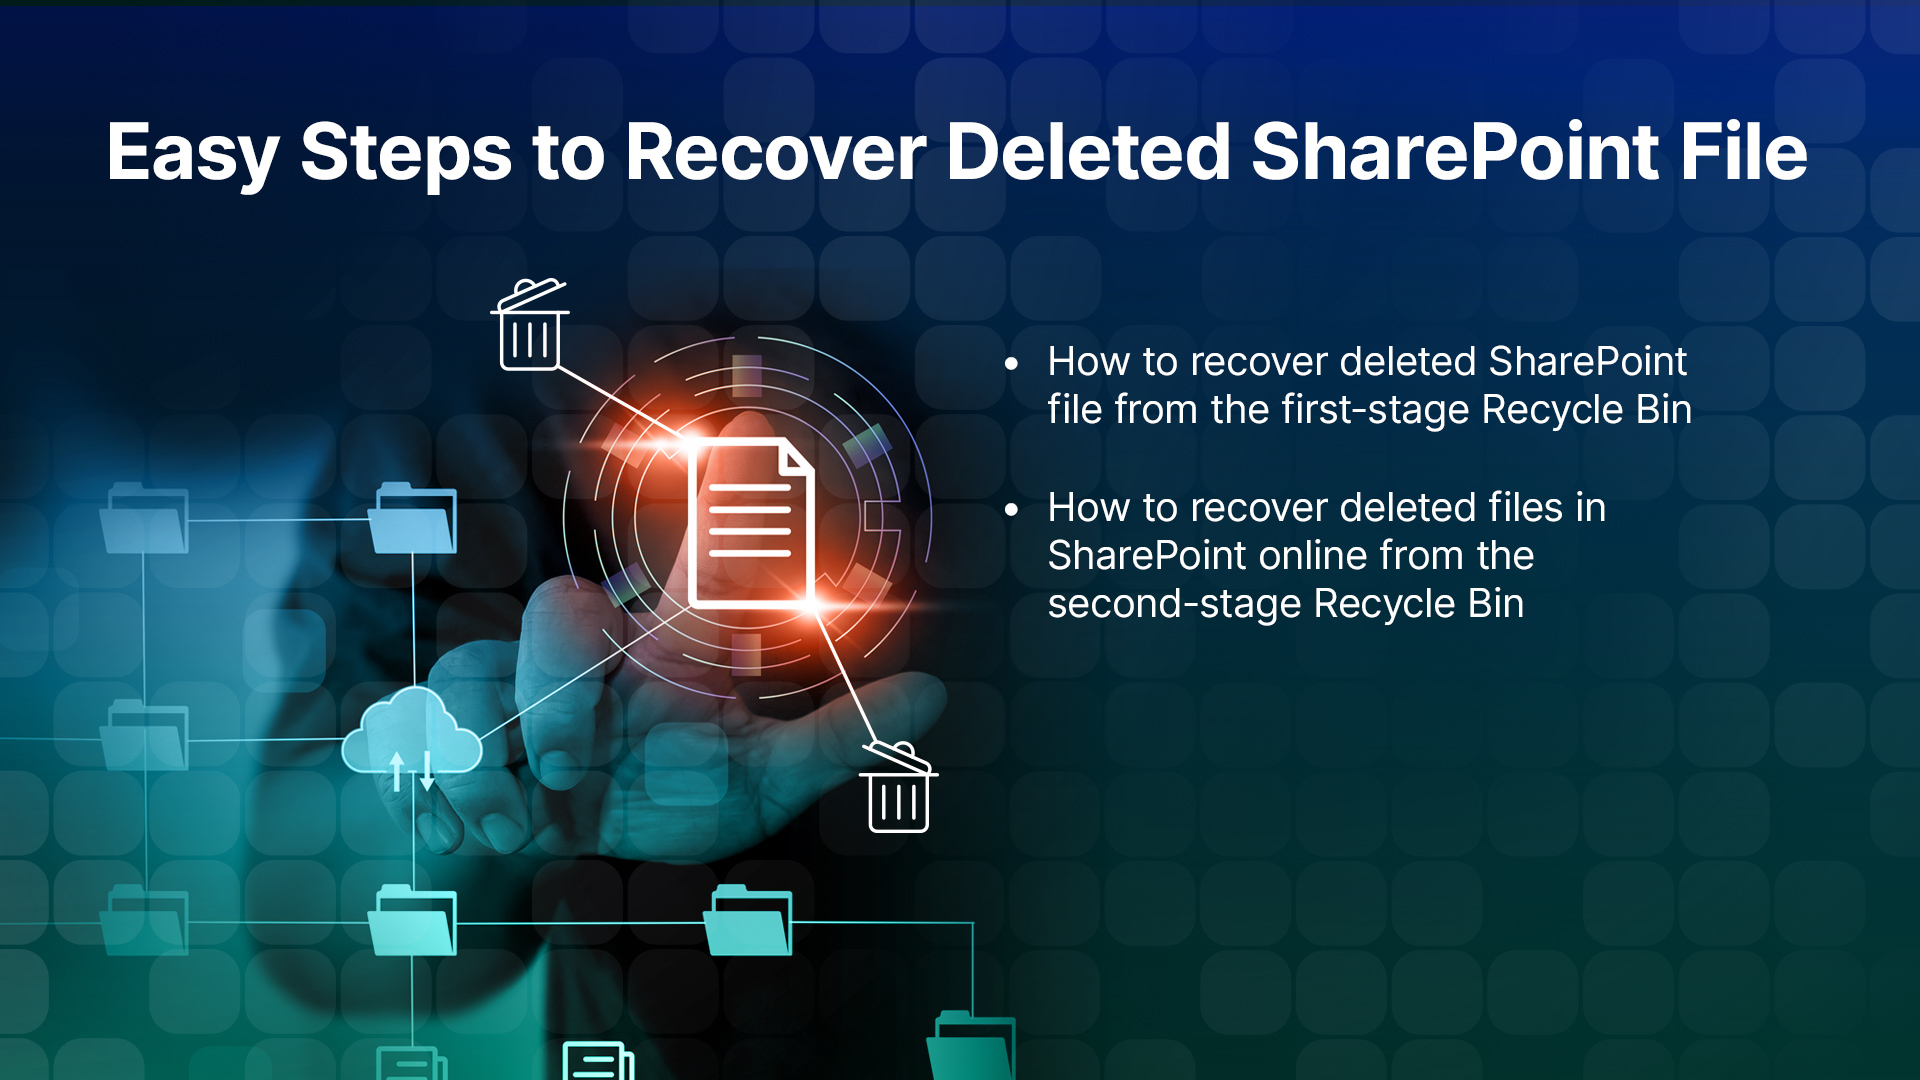 Easy Steps to Recover Deleted SharePoint File